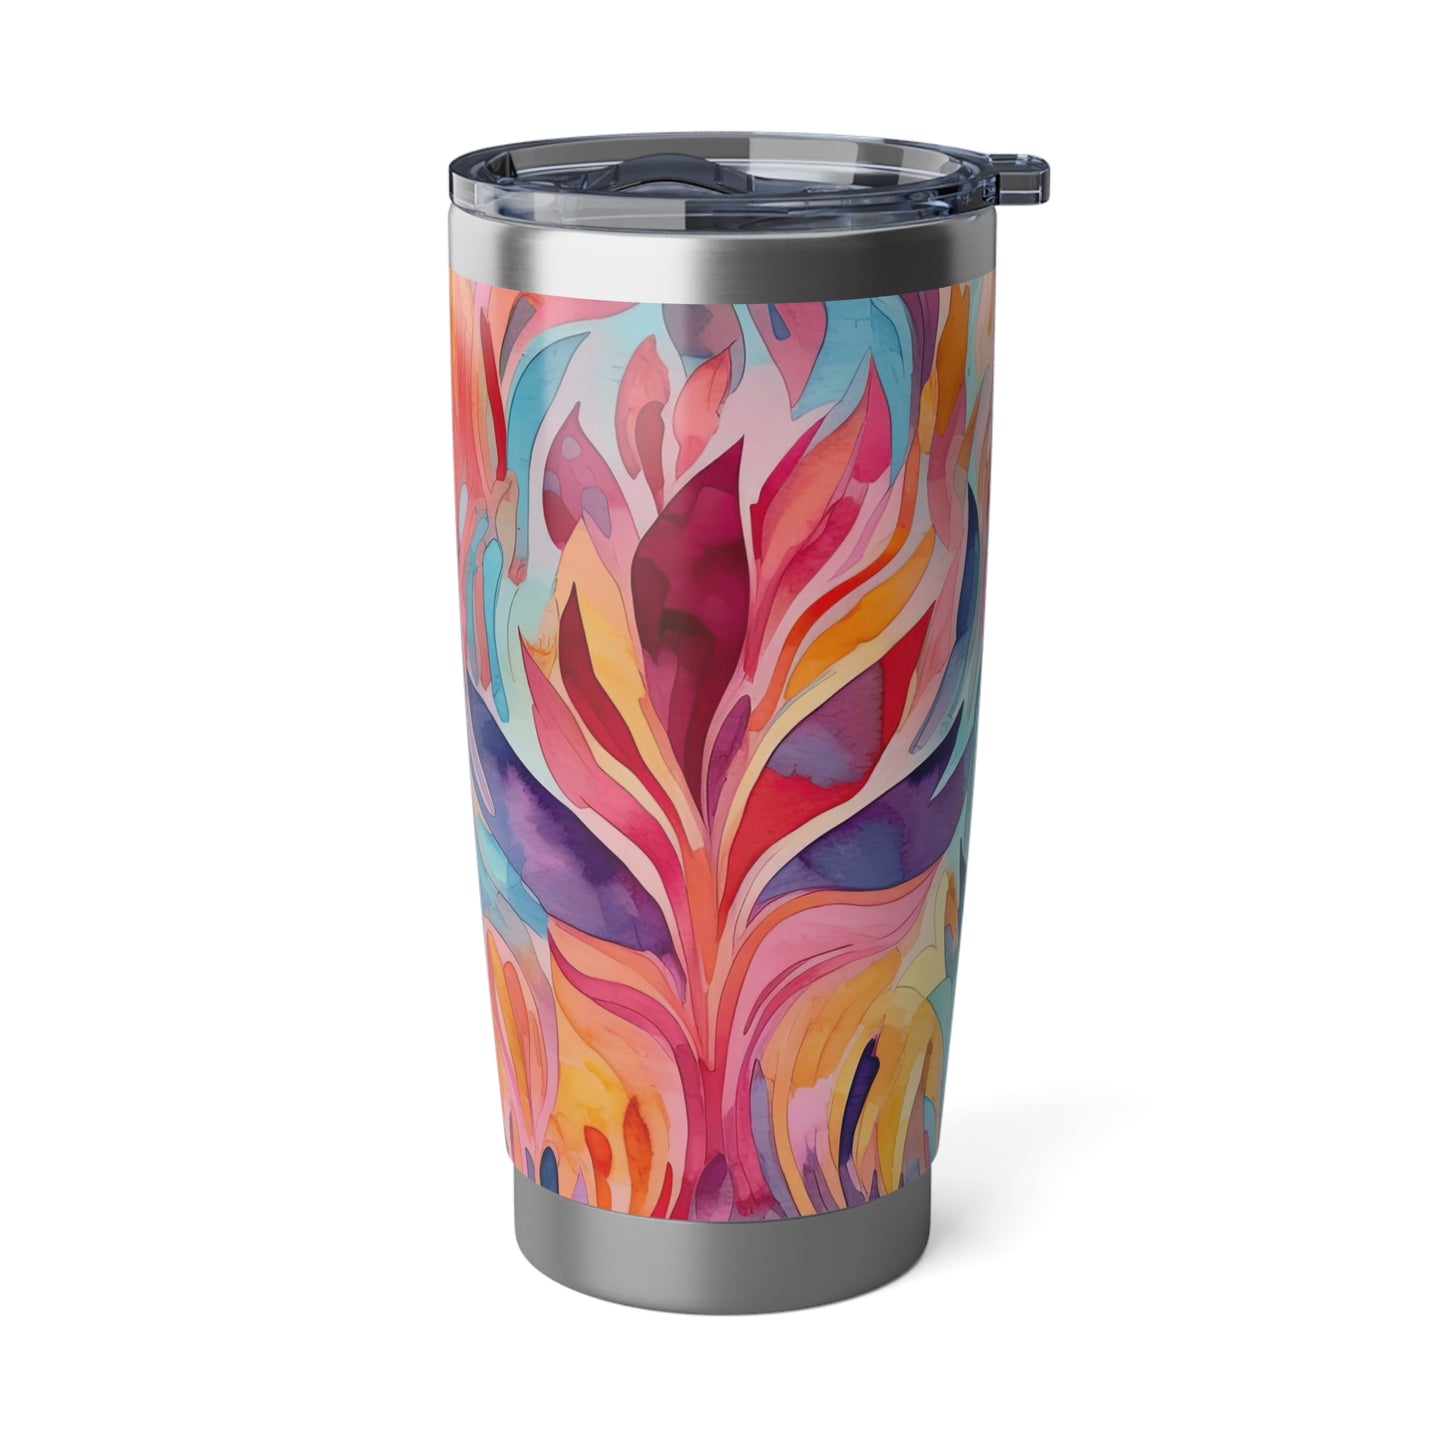 Colorful Abstract Design 1.6 - Vagabond 20oz Tumbler - Stainless Steel - Double Wall